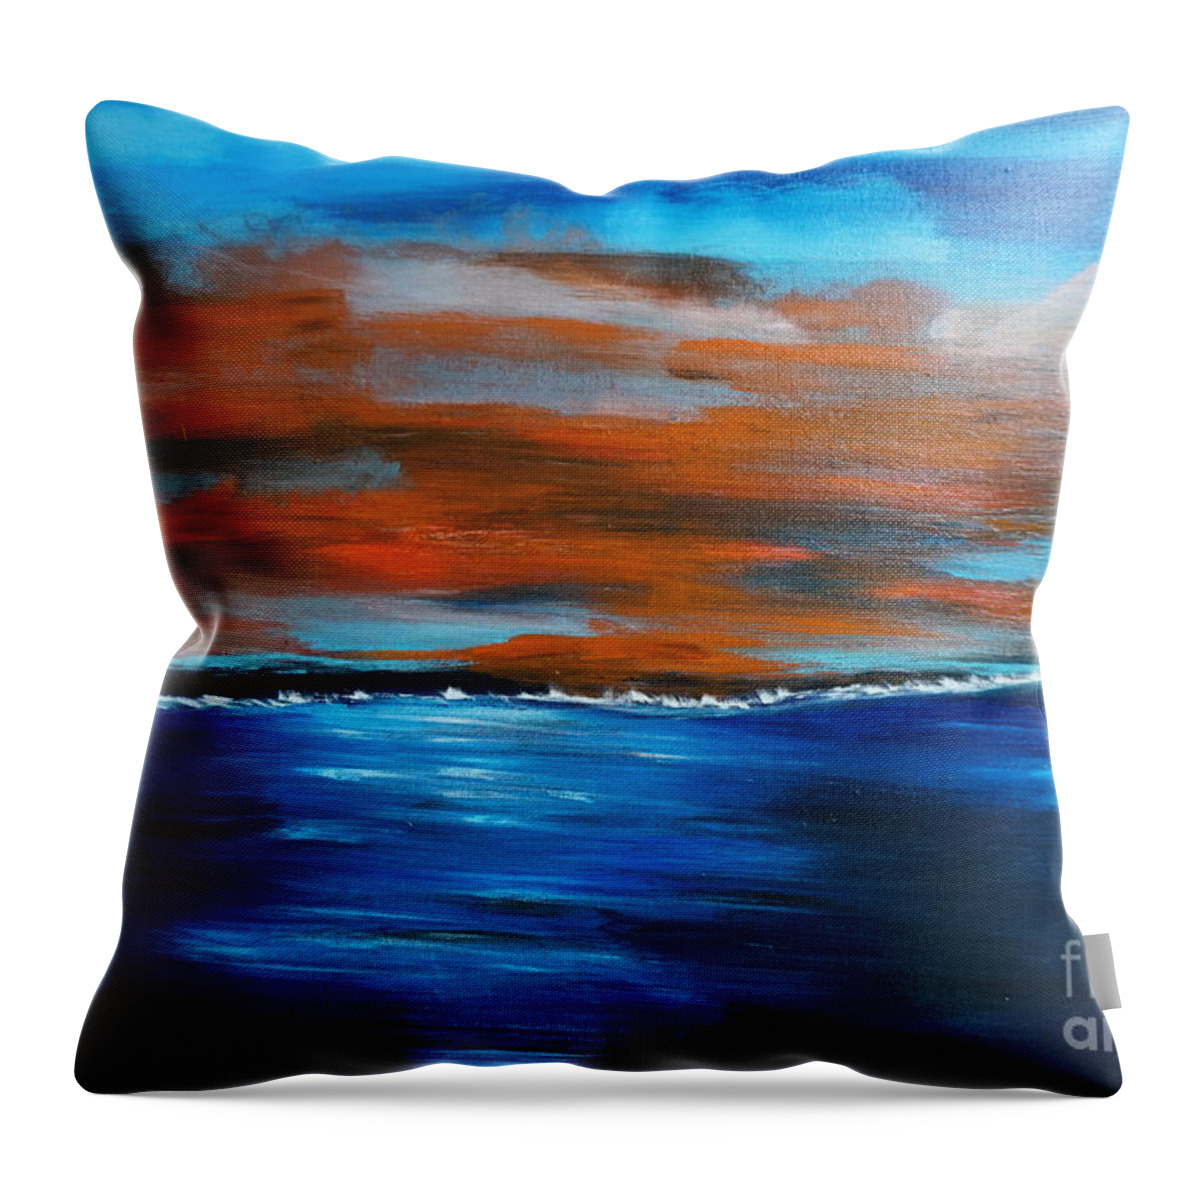 Sunset Throw Pillow featuring the painting Sunset II by Jimmy Clark